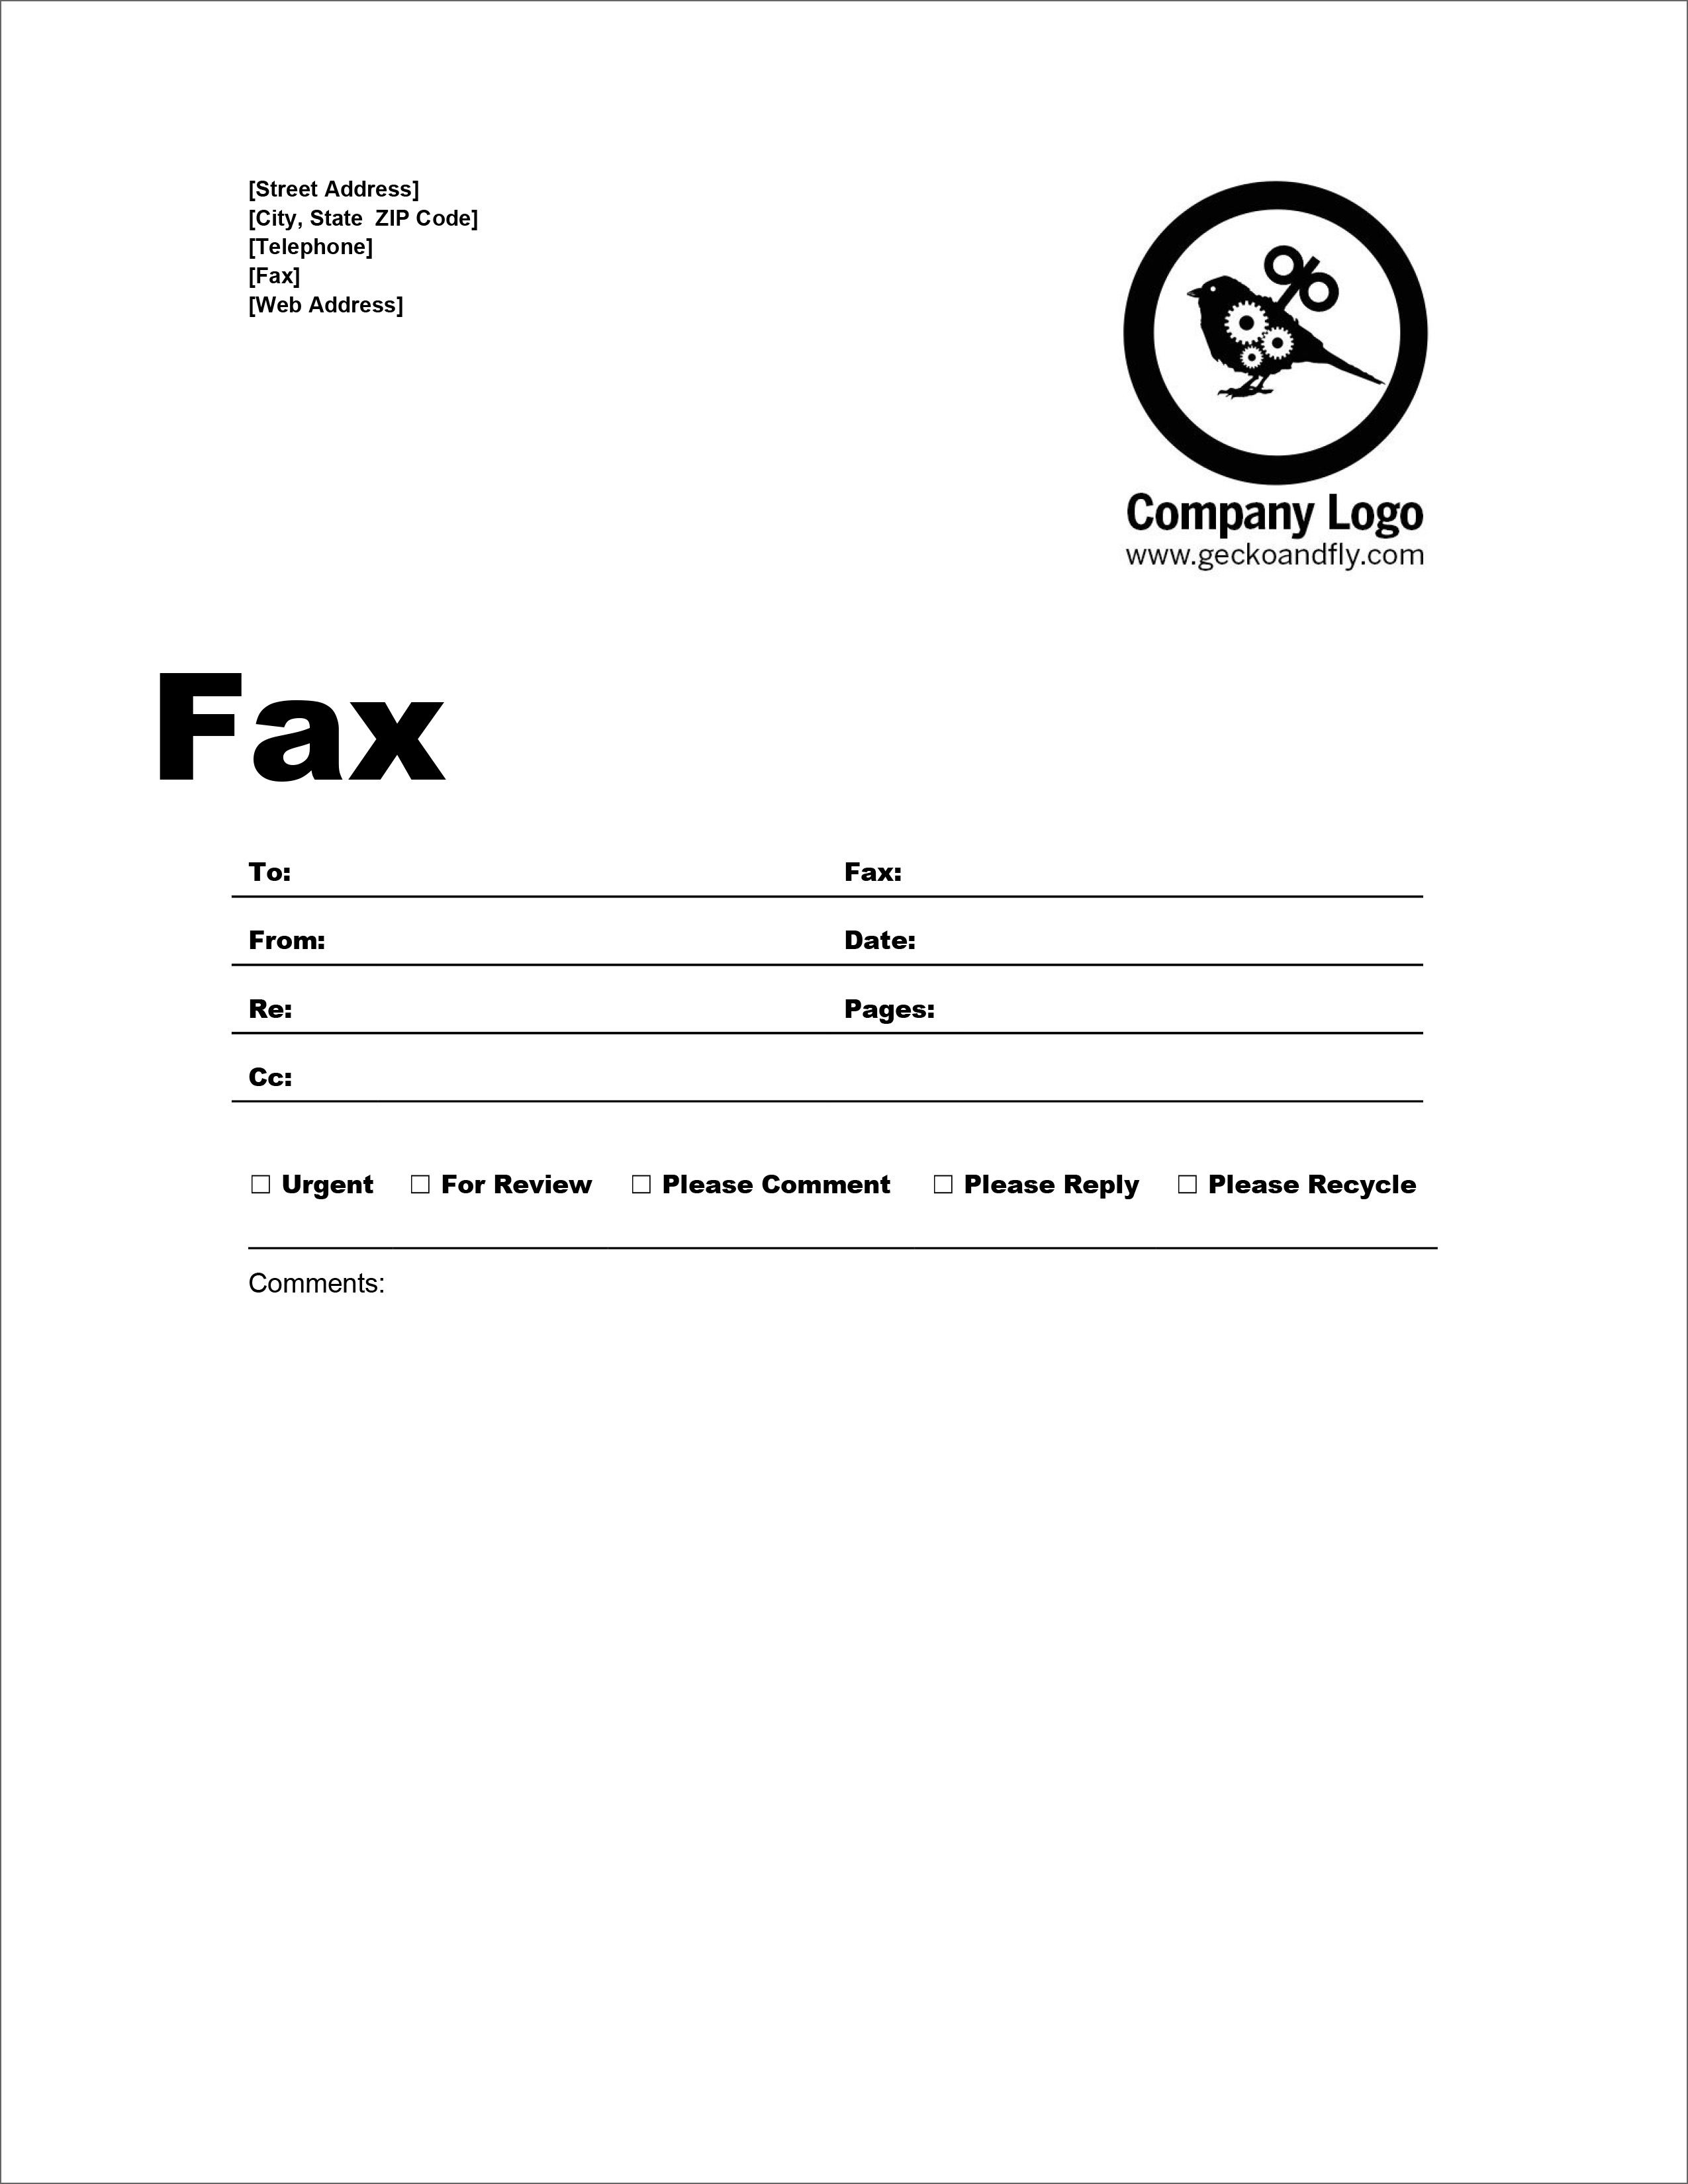 free-printable-business-fax-cover-sheet-printable-templates